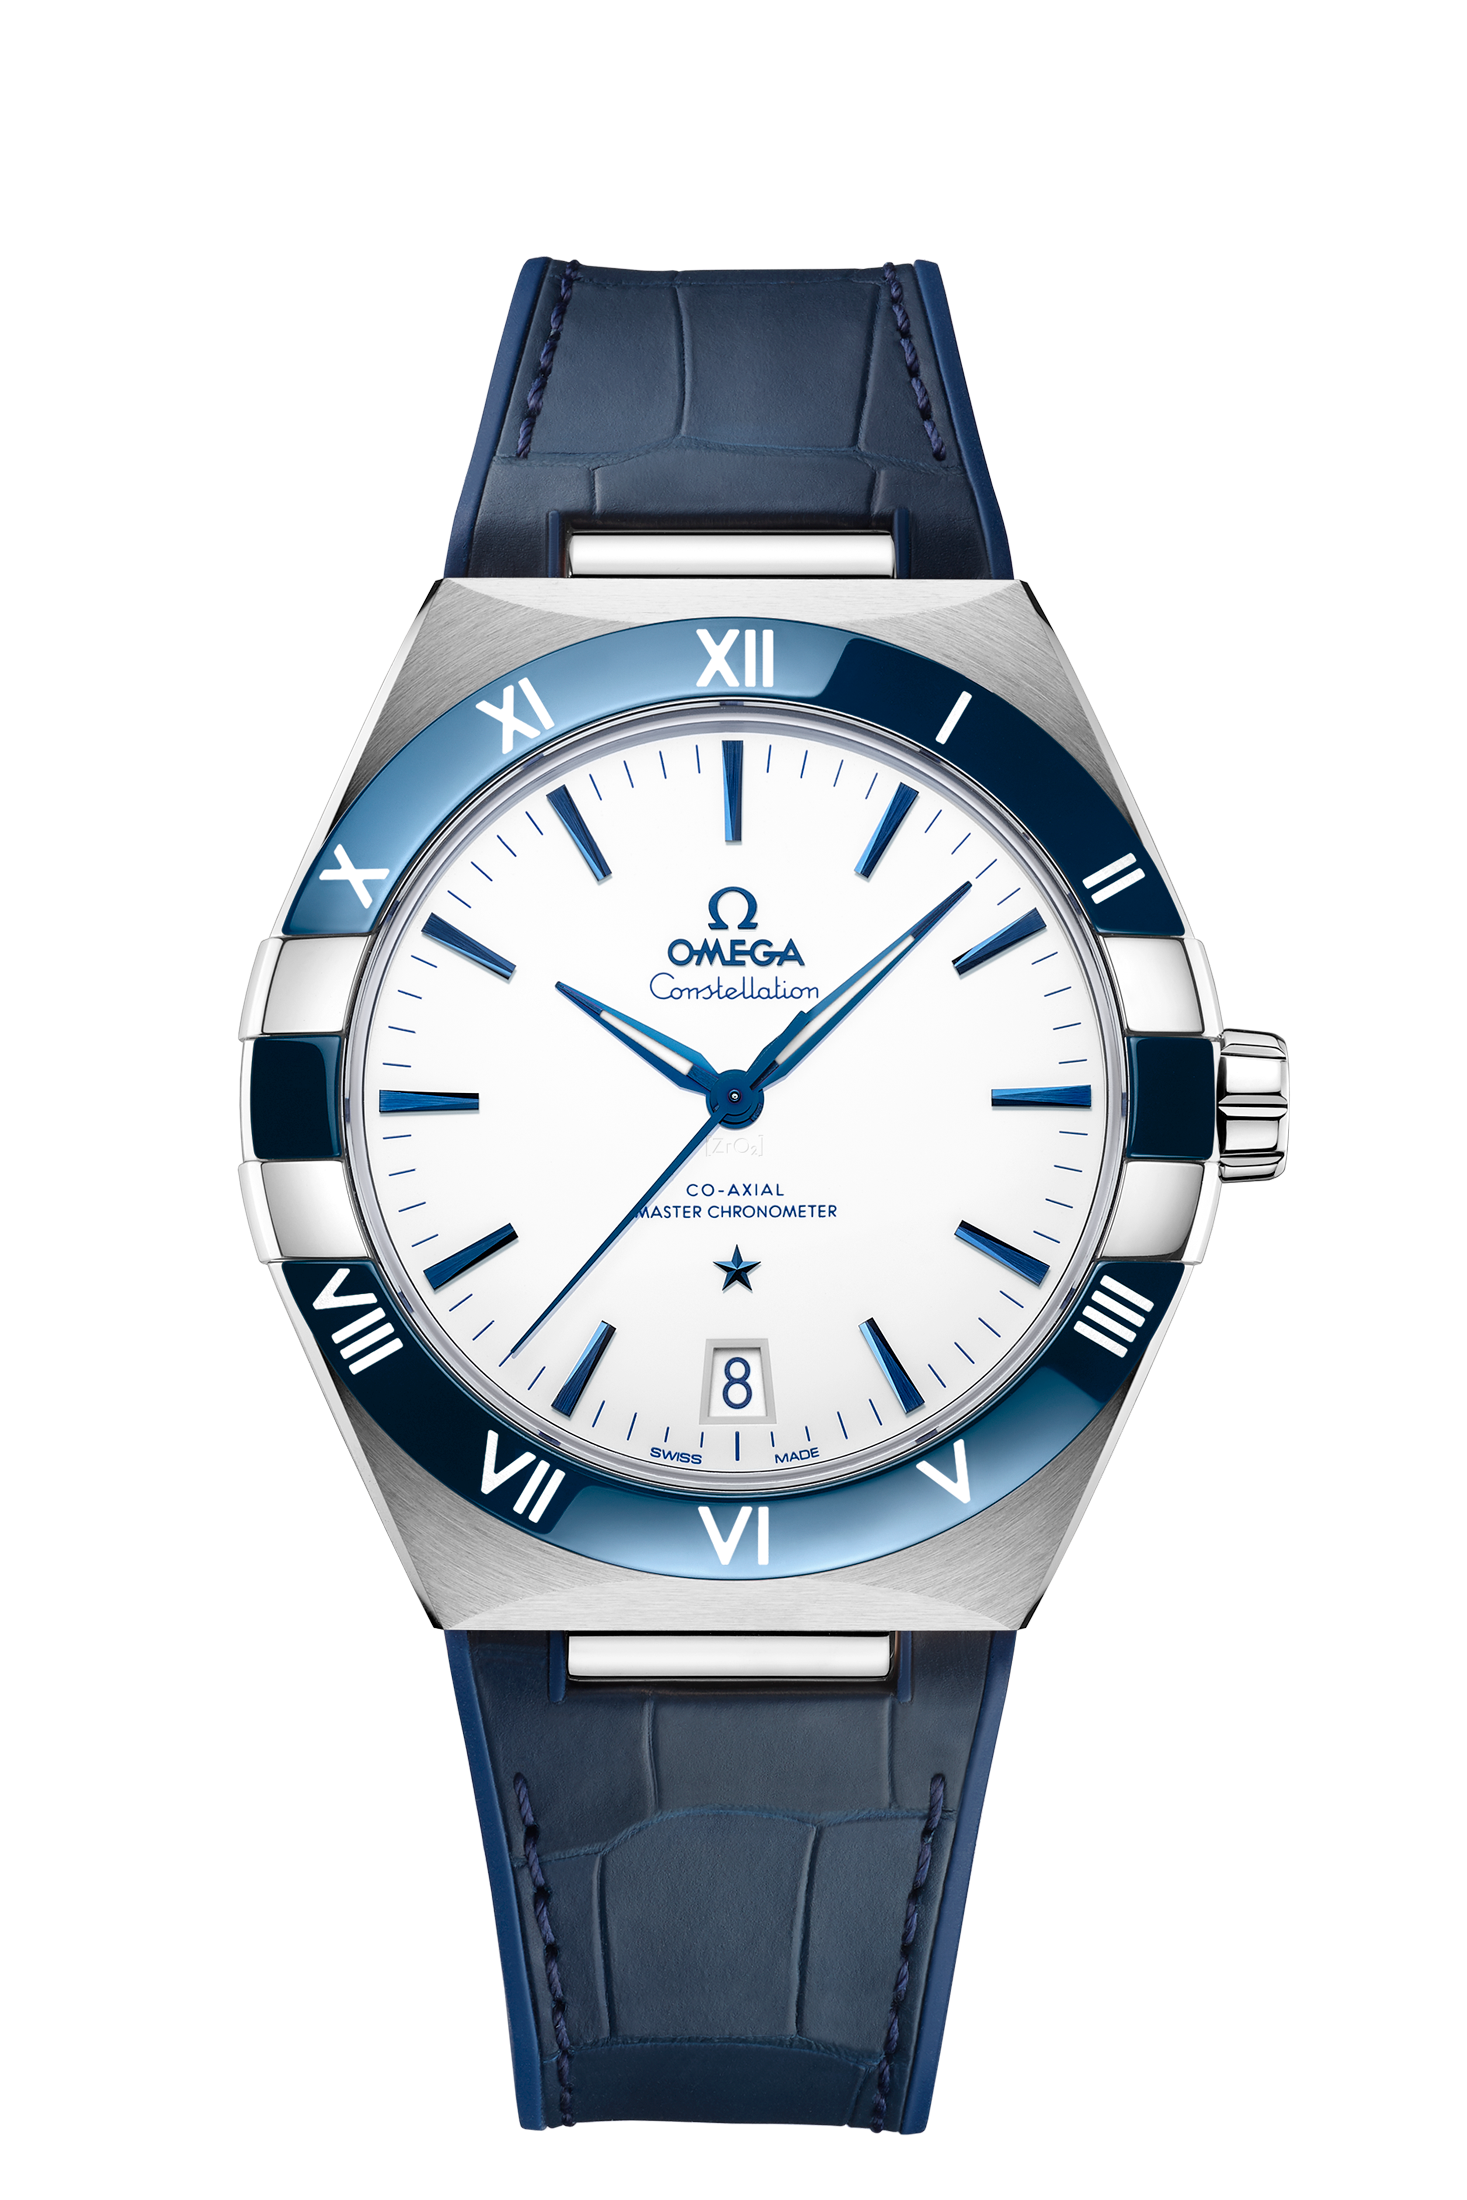 OMEGA Constellation Co-Axial Master Chronometer